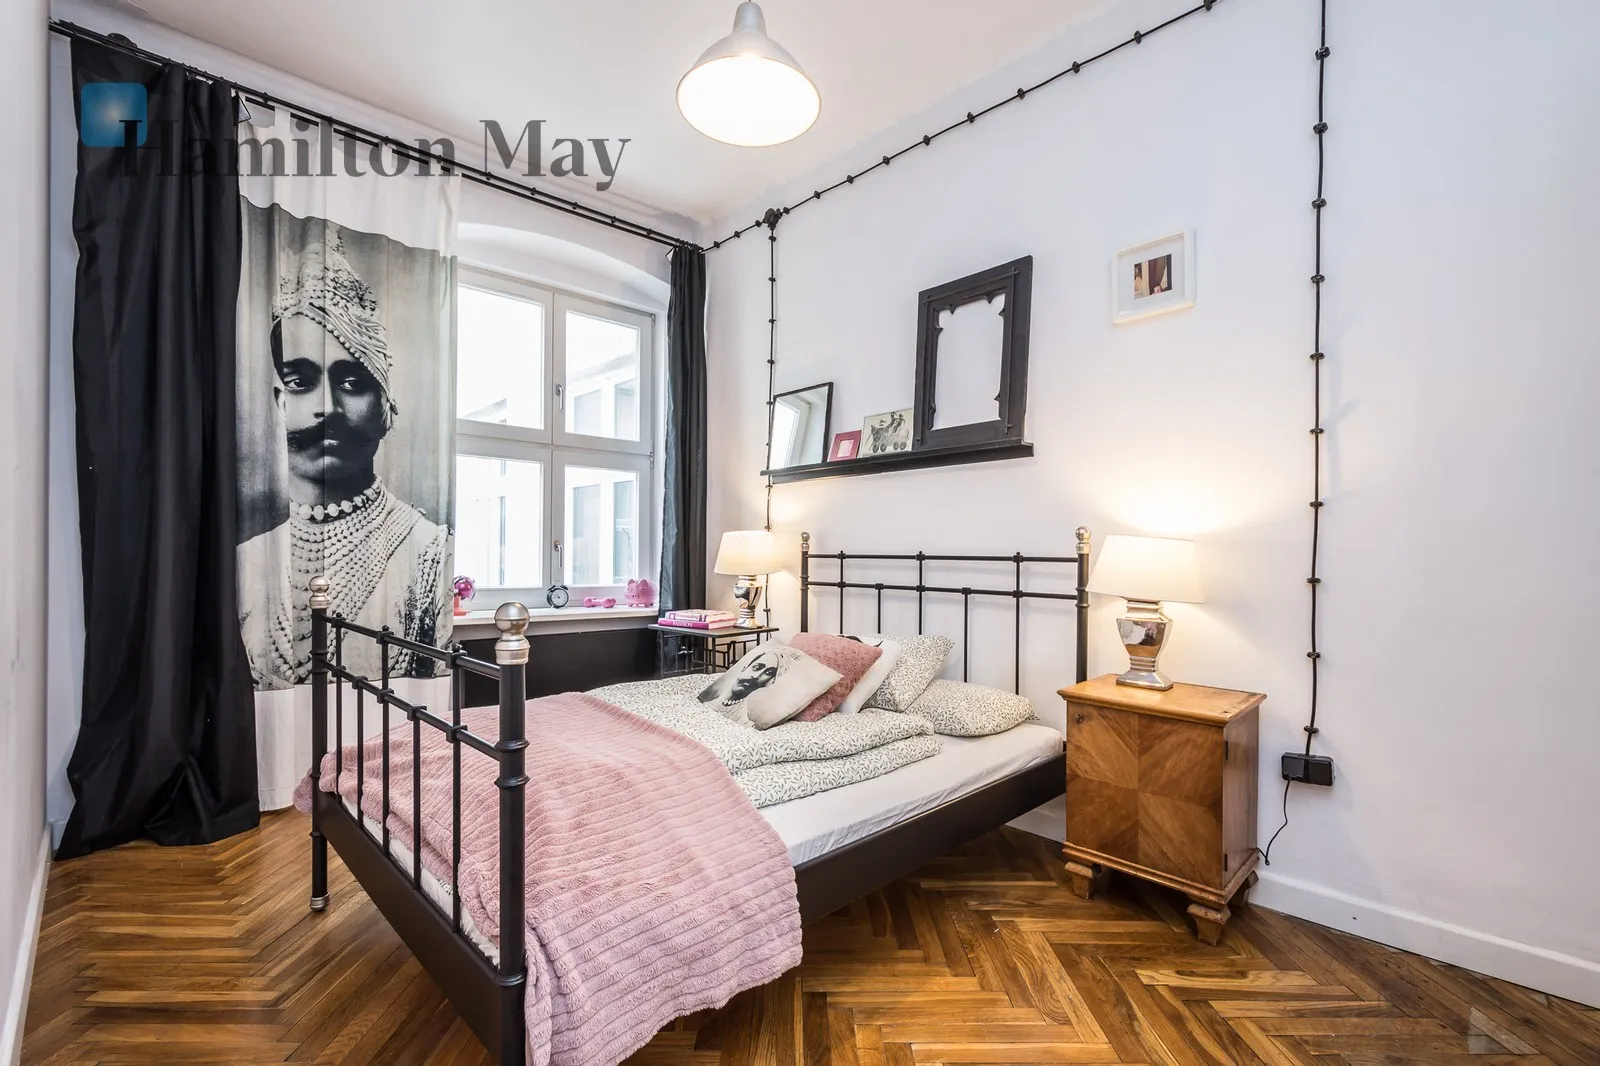 For sale, a two bedroom, quaint apartment, located at Grodzka street